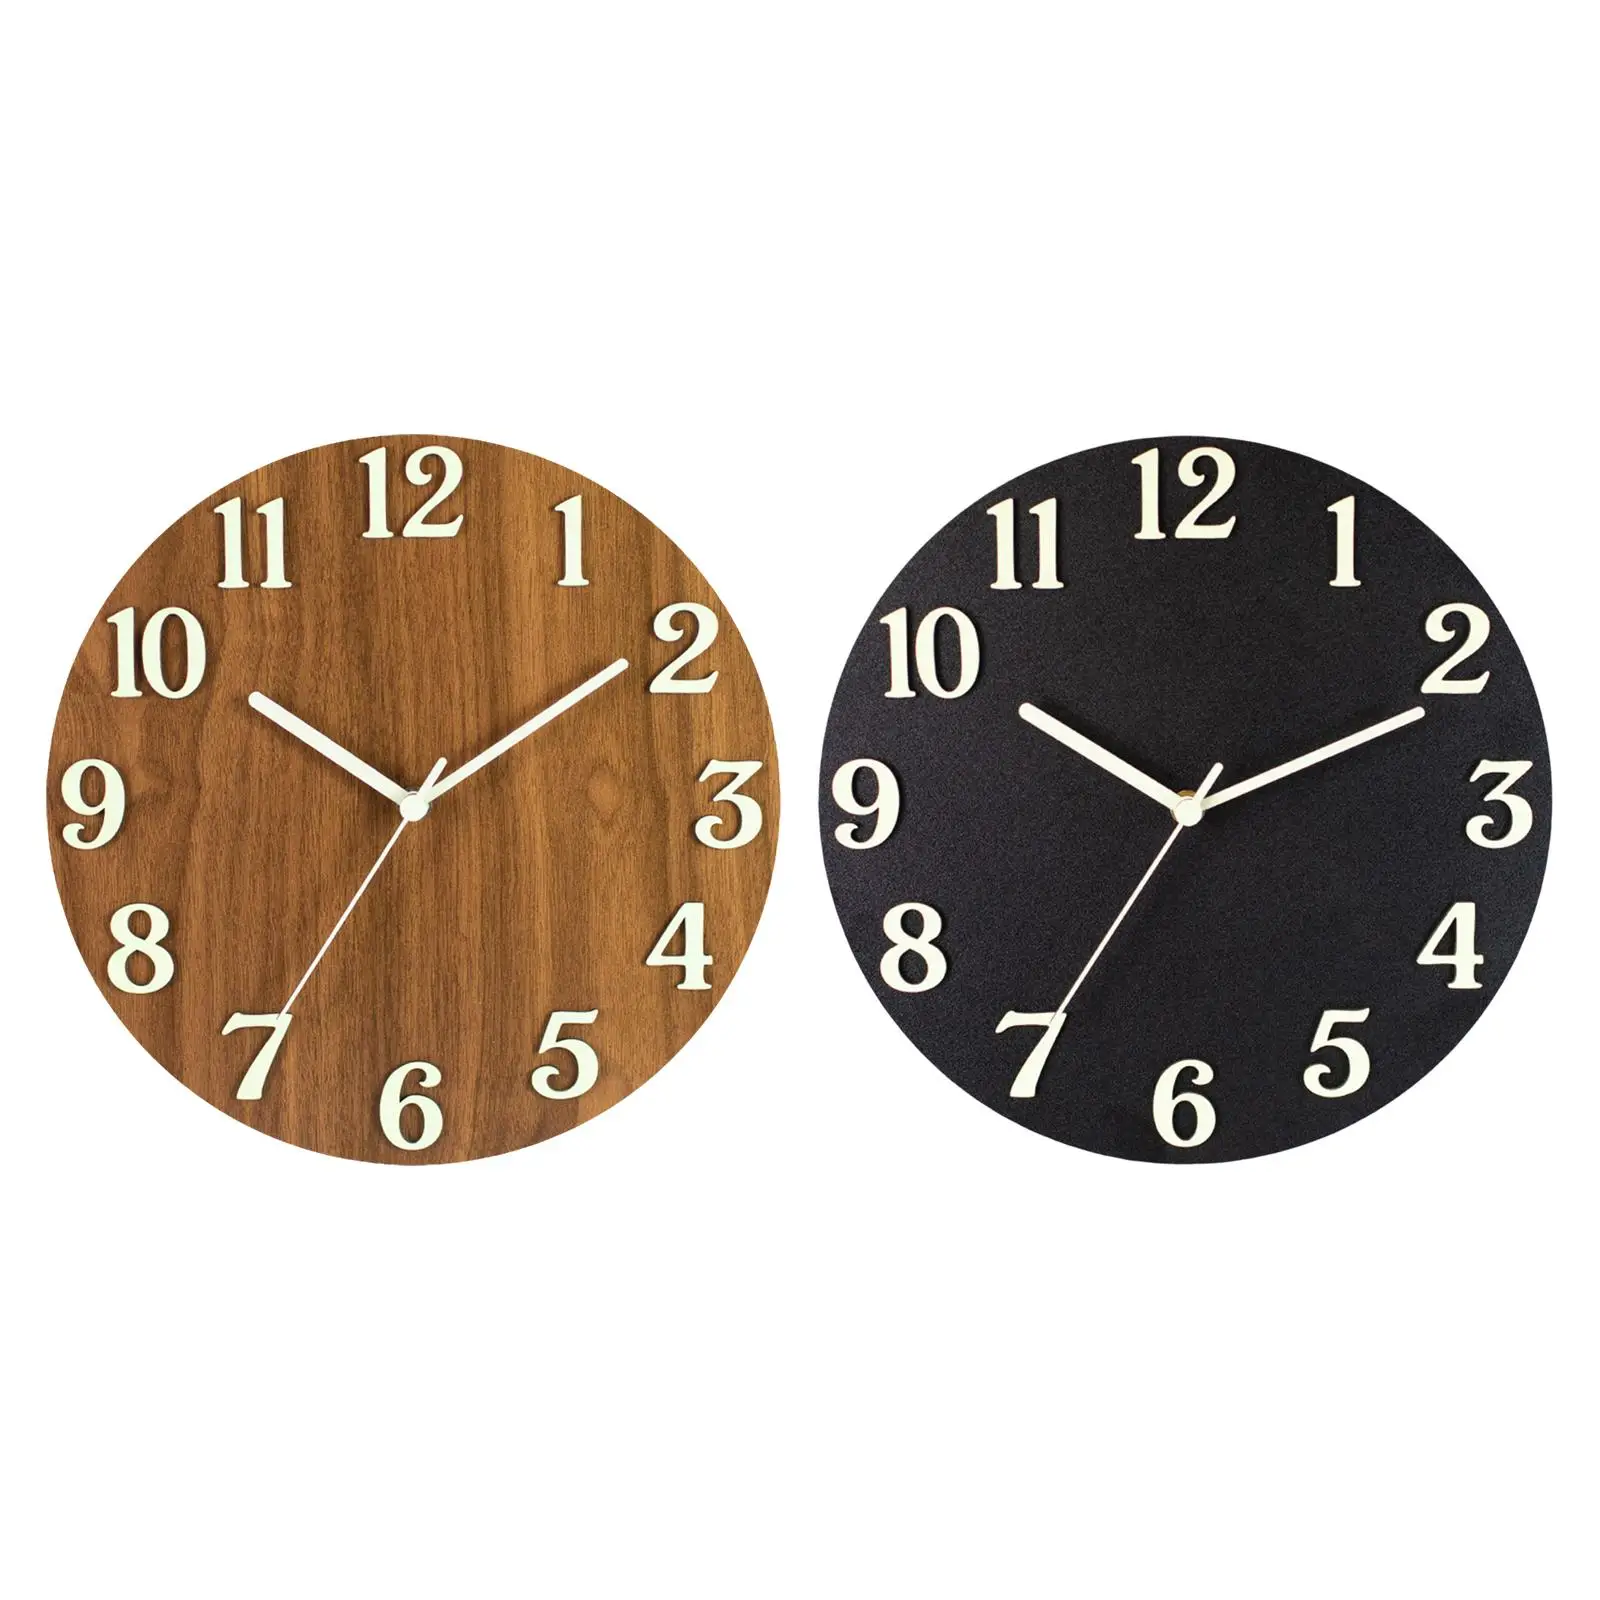 Simple Luminous Wall Clock Wooden Hanging Clock Light in The Dark Non Ticking Silent Battery Operated for Home Bedroom Kitchen